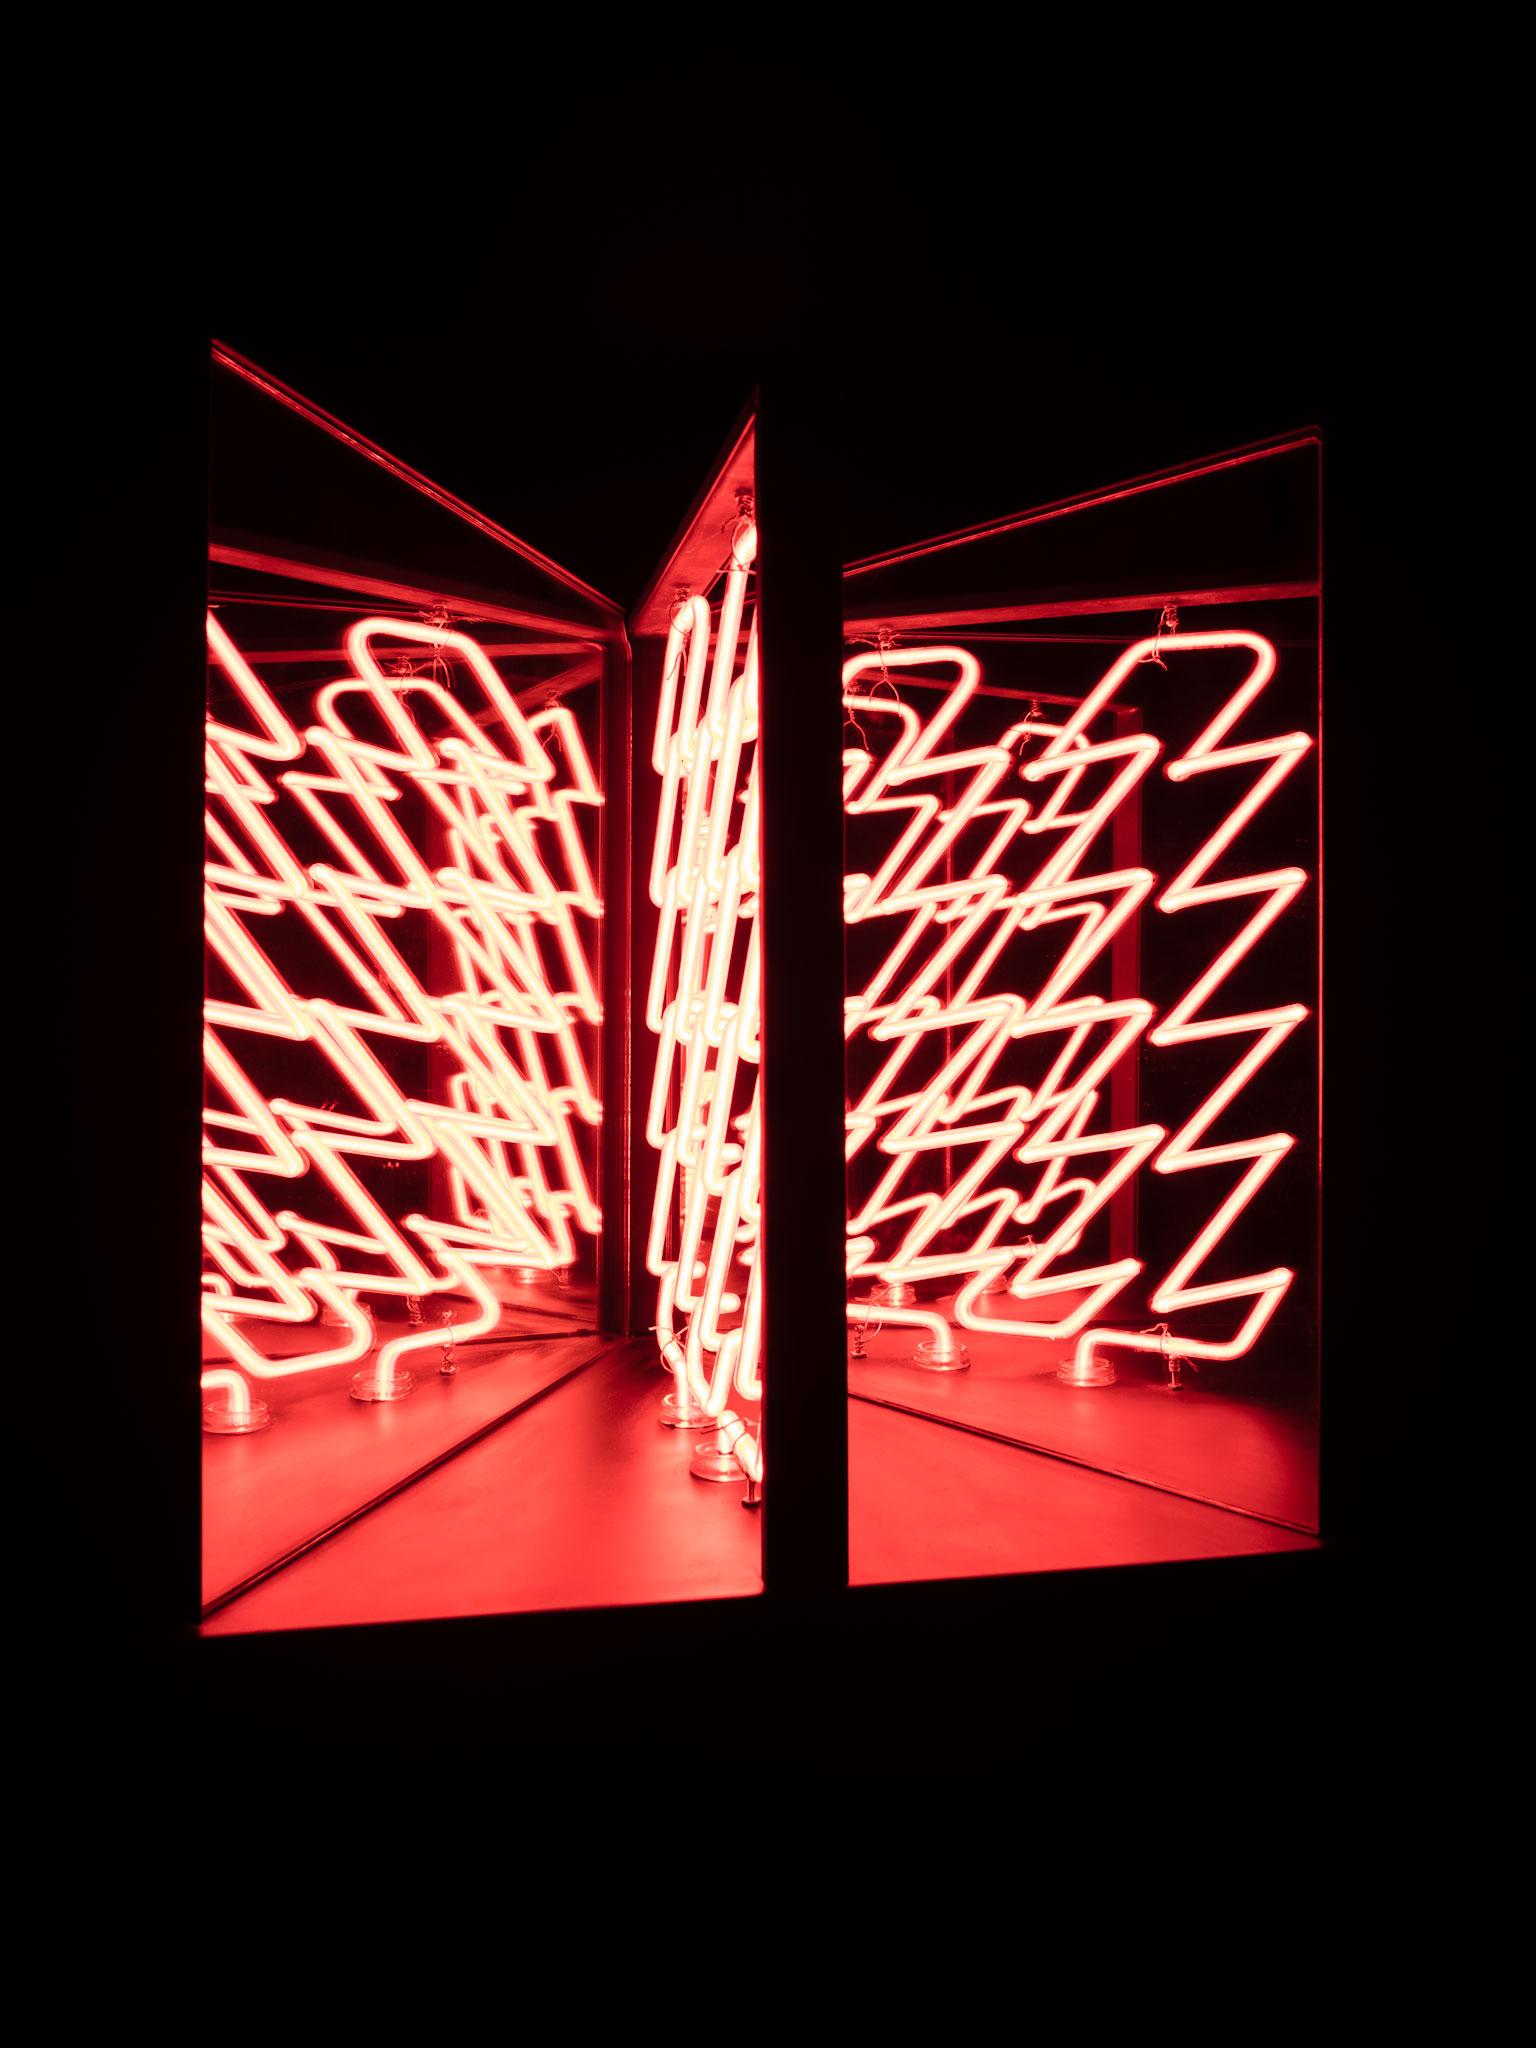 neon lights in a zig zag pattern in a three panel glass box